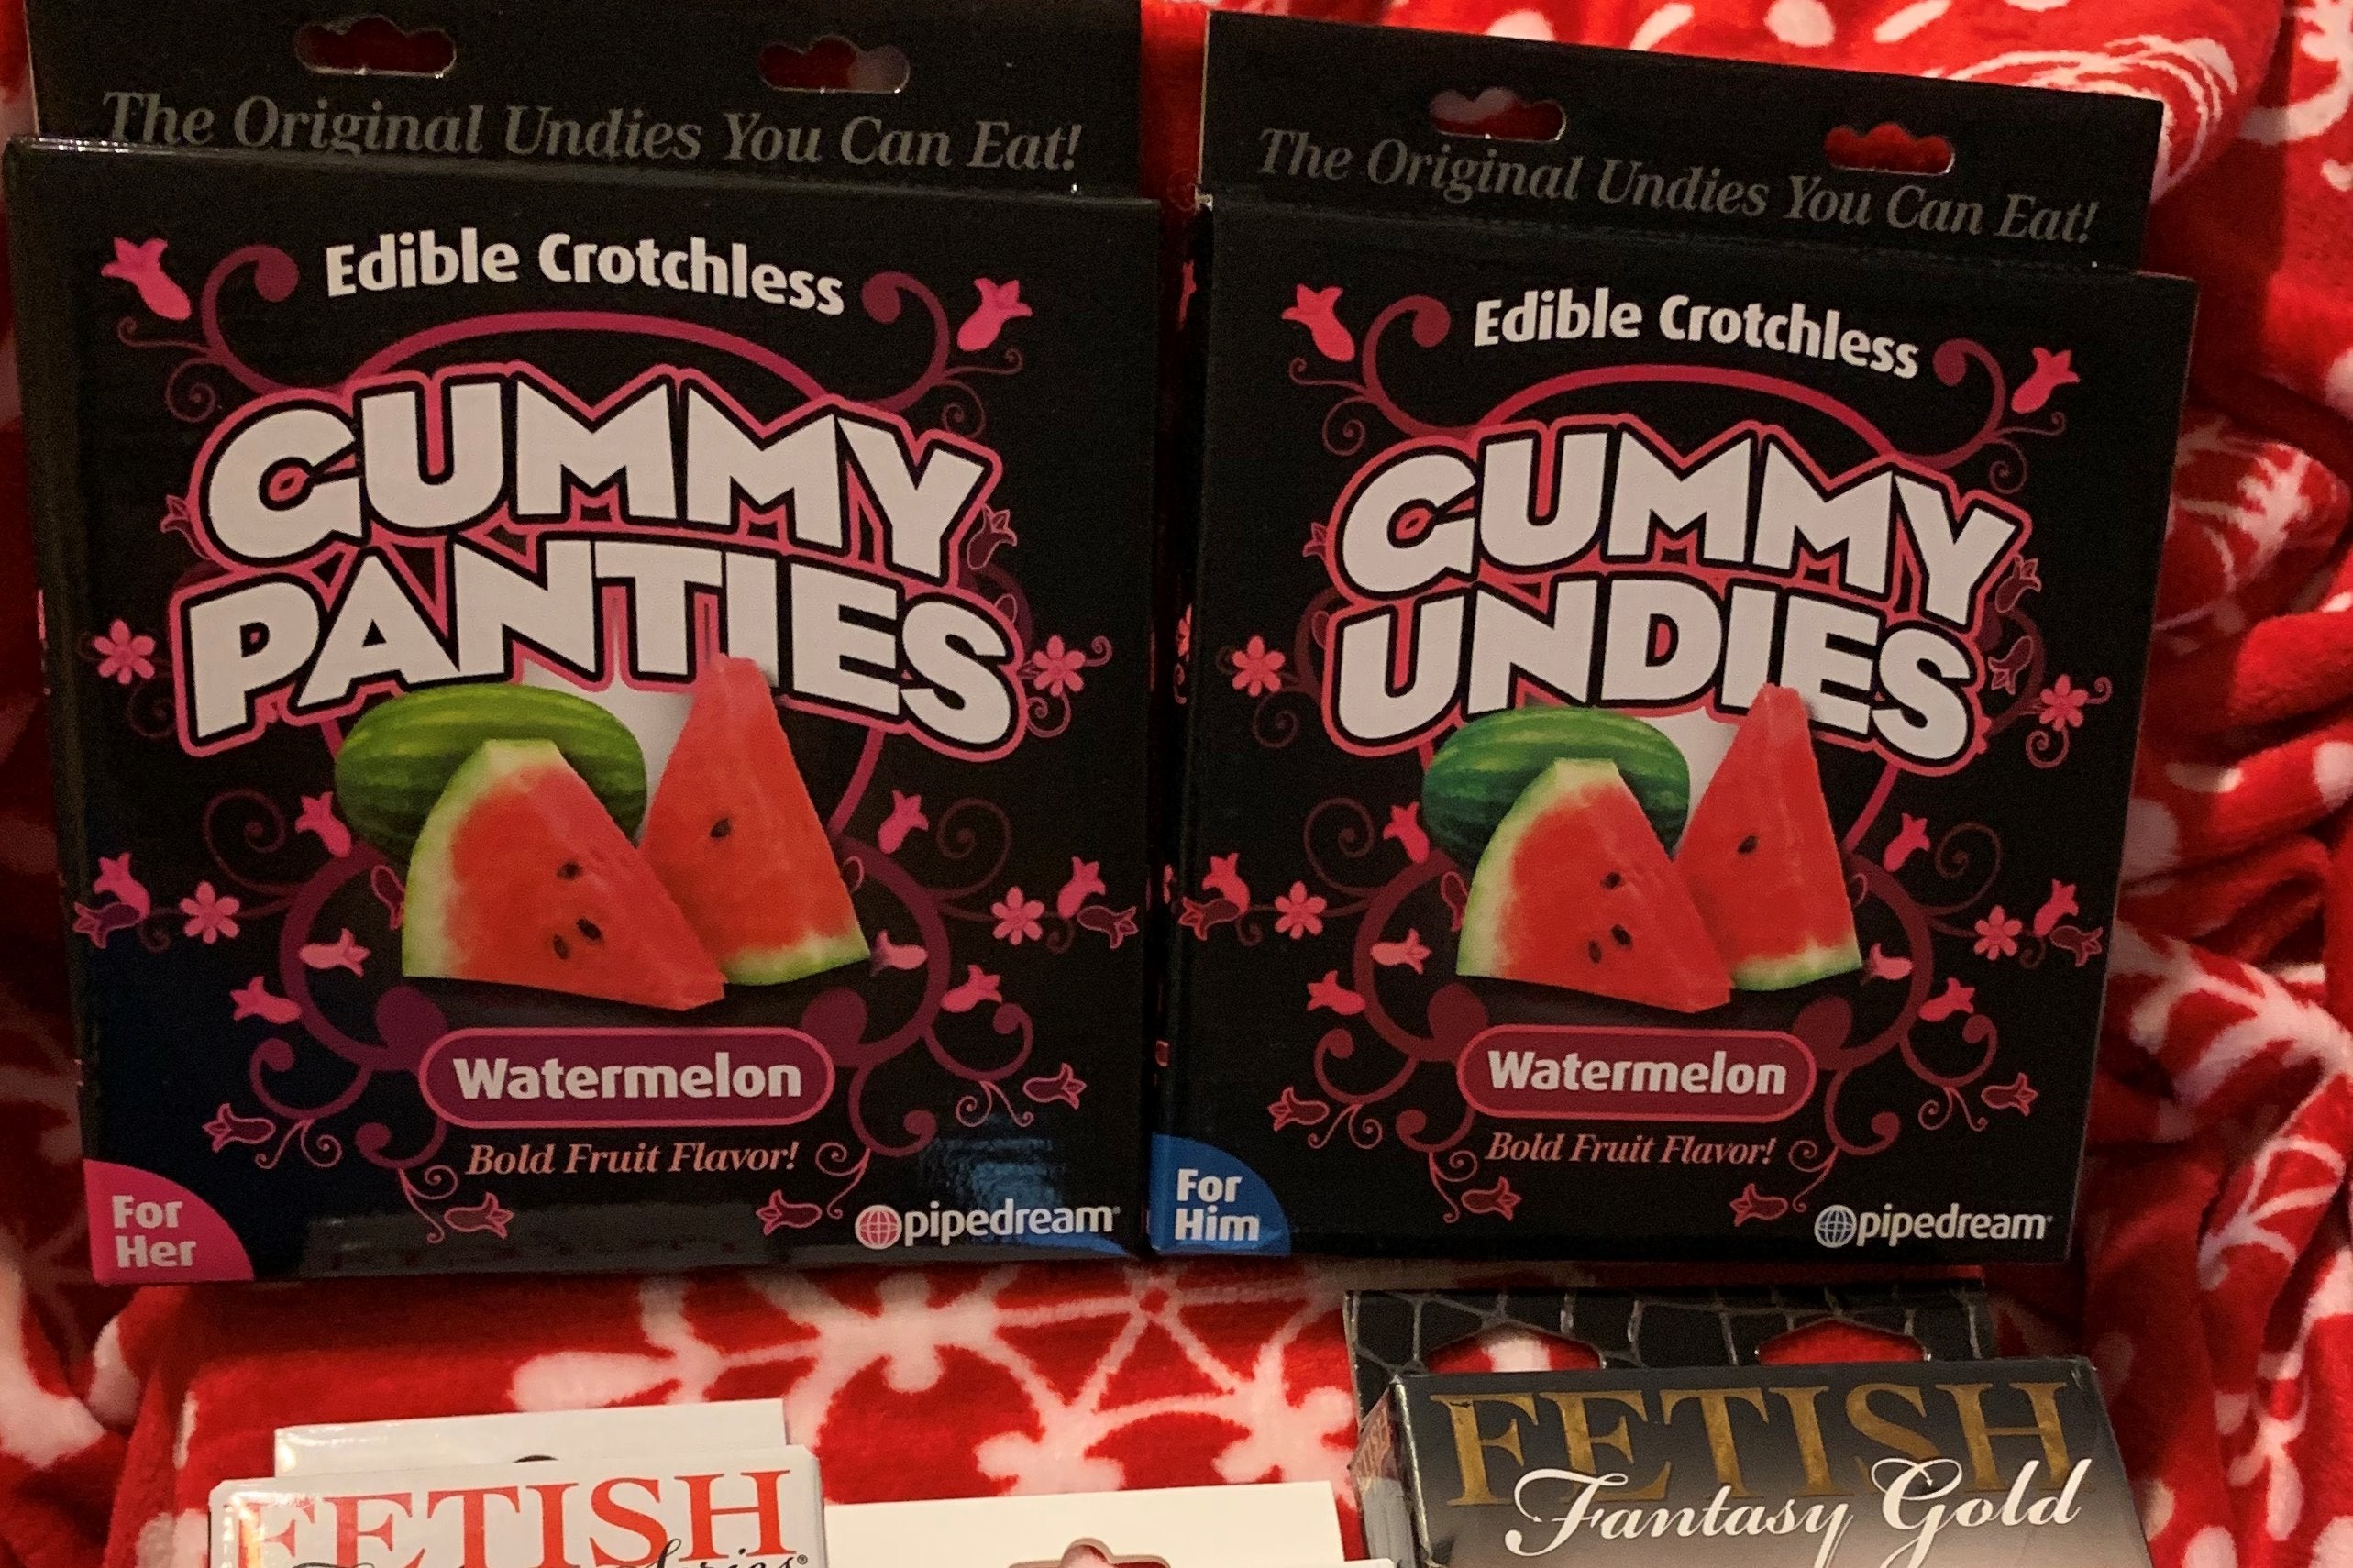 Edible Crotchless Gummy Panties Undies for HER Lingerie CANDY Flavored -  CHOOSE